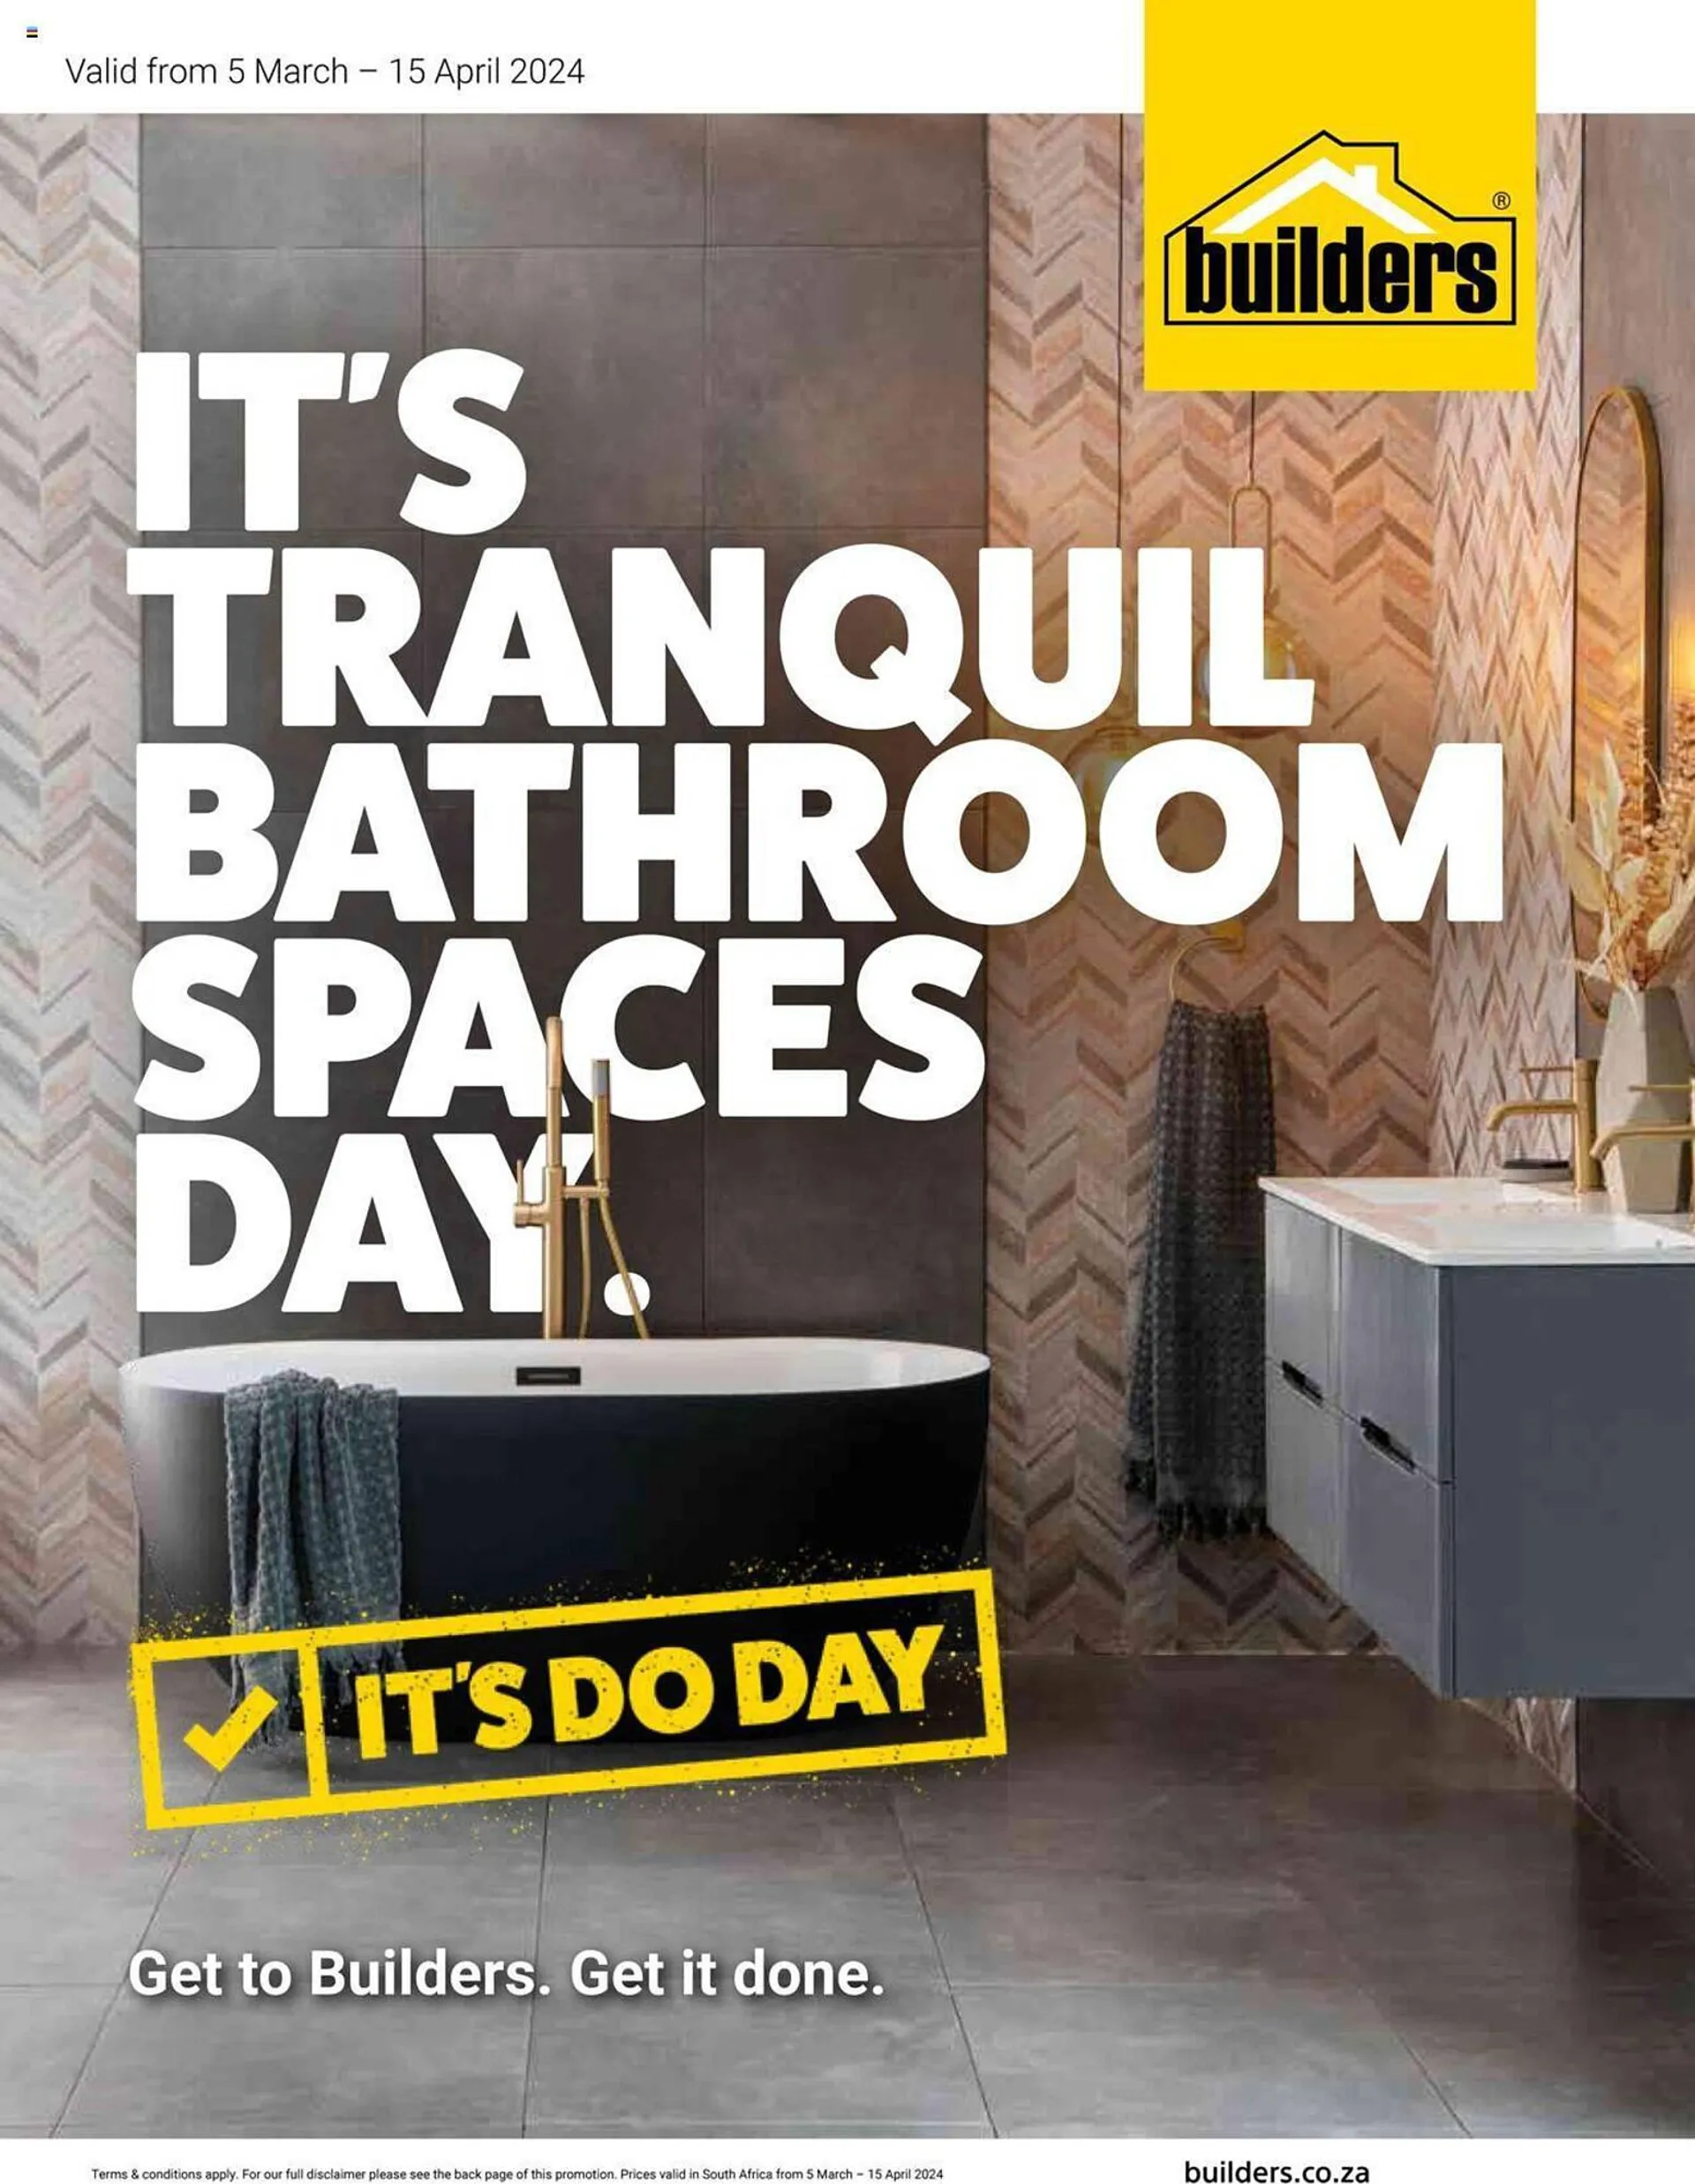 Builders Warehouse catalogue - 5 March 15 April 2024 - Page 1